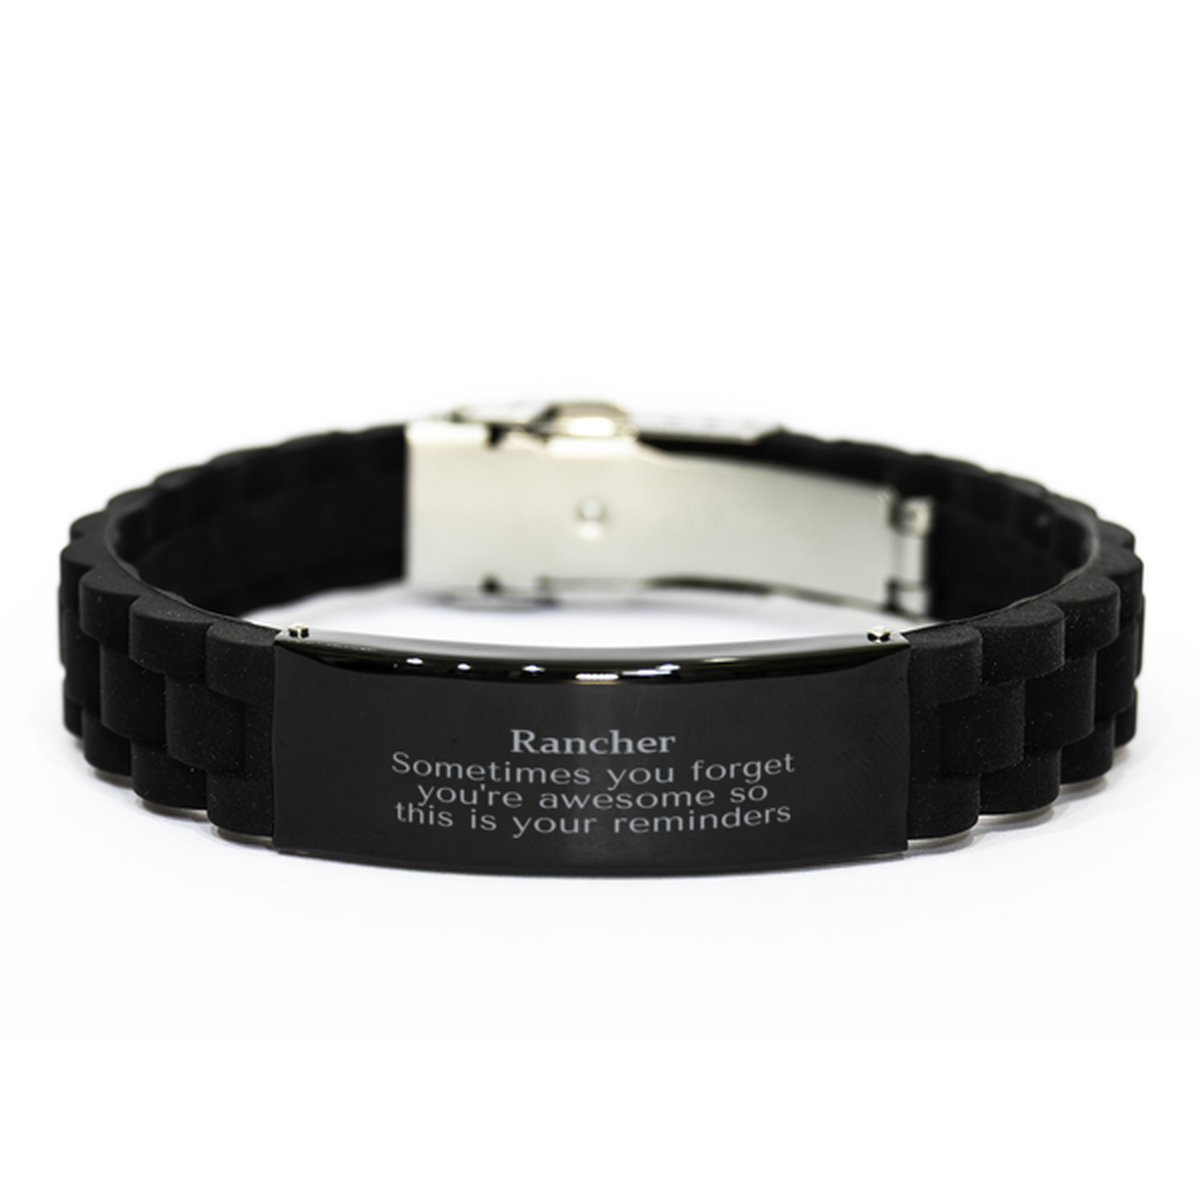 Sentimental Rancher Black Glidelock Clasp Bracelet, Rancher Sometimes you forget you're awesome so this is your reminders, Graduation Christmas Birthday Gifts for Rancher, Men, Women, Coworkers